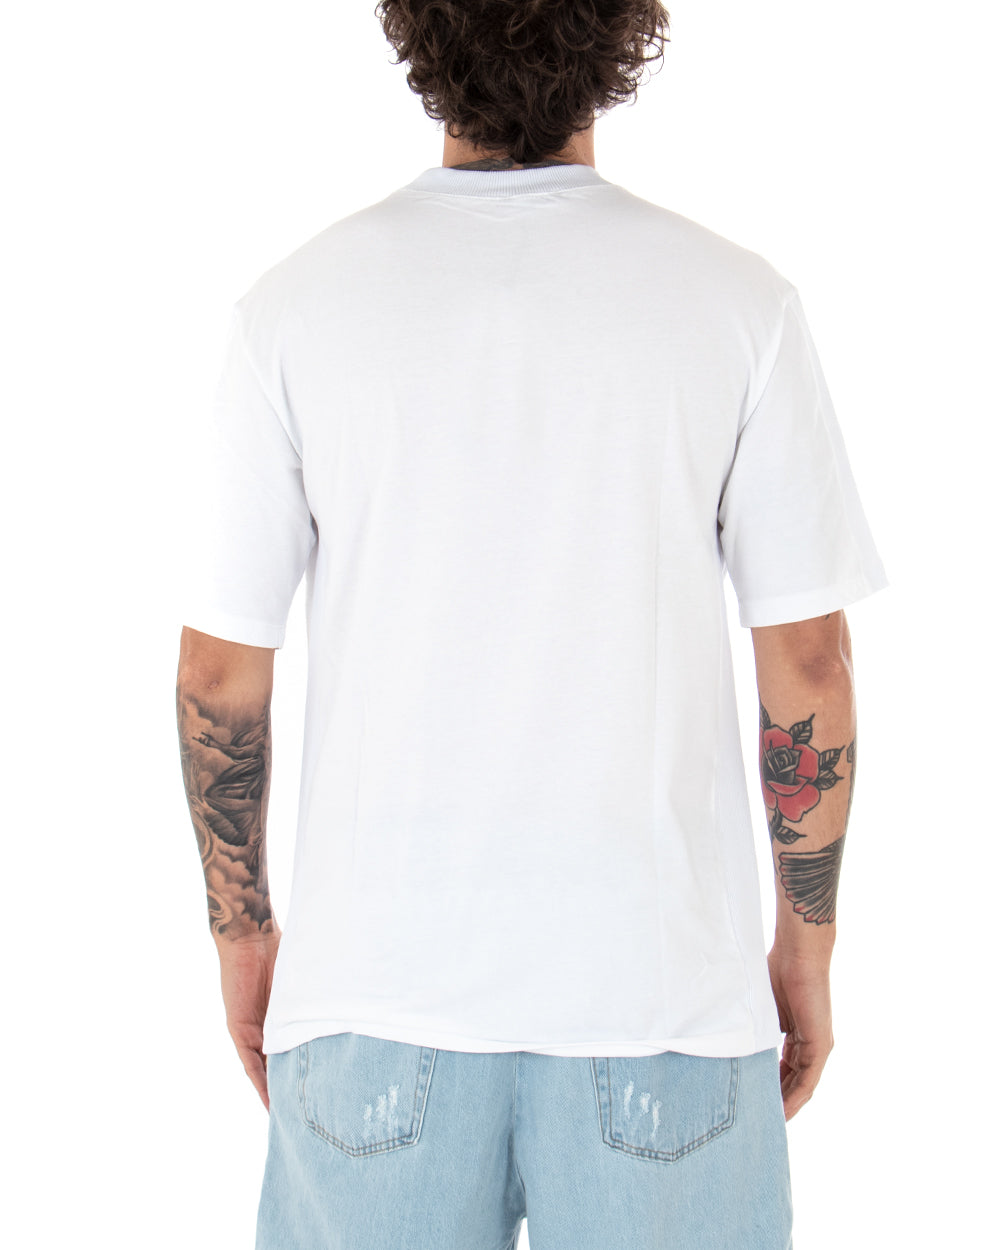 Men's T-Shirt Solid White Elastic Band Short Sleeve Casual GIOSAL